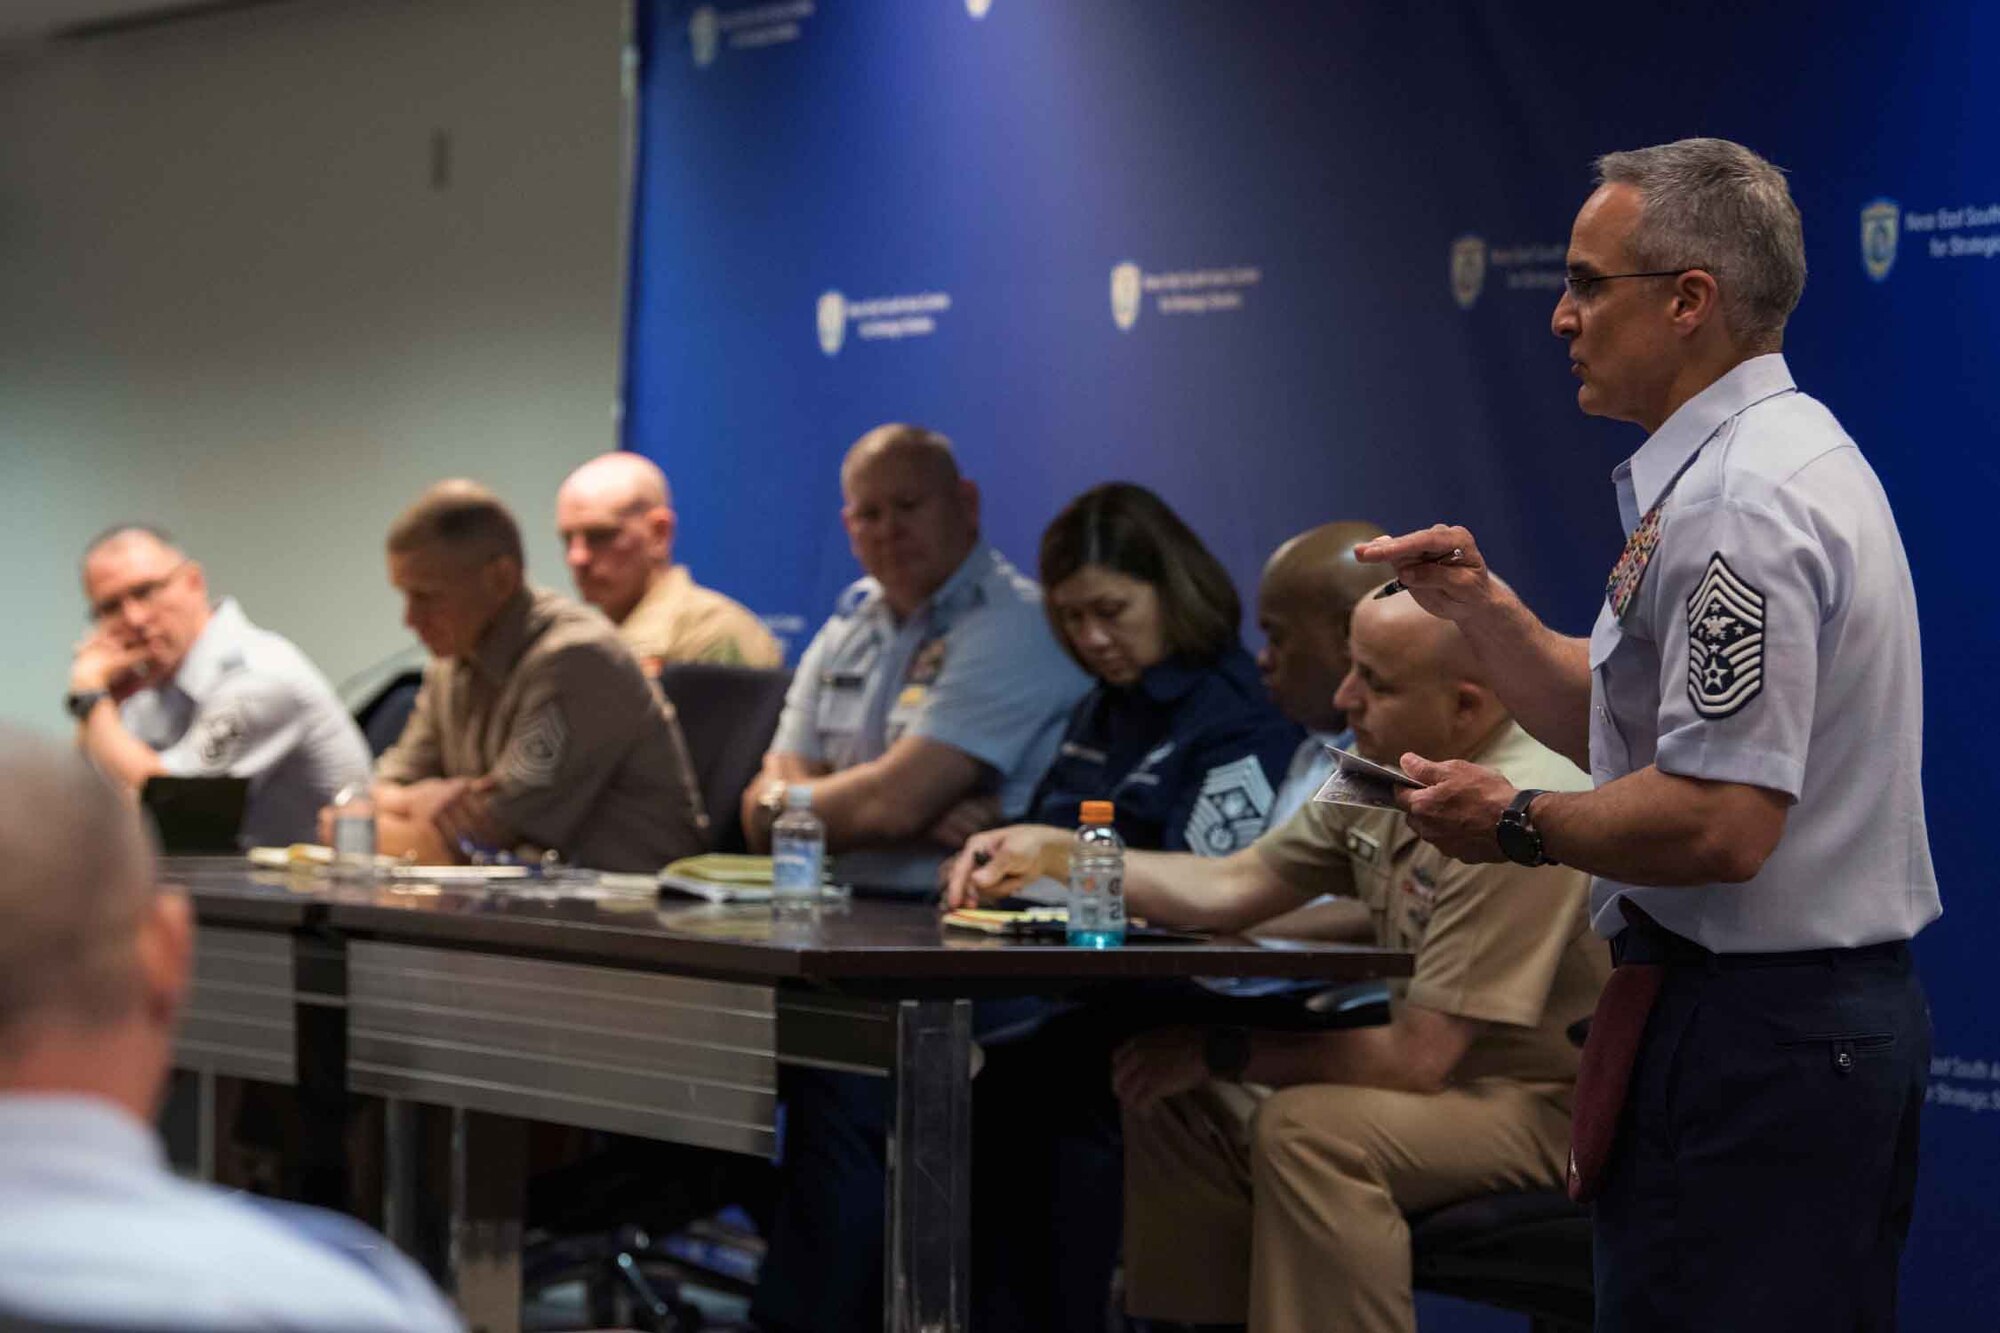 Senior Enlisted Advisor to the Chairman Ramón "CZ" Colón-López discusses the future of enlisted professional military education with the Defense Department’s senior enlisted advisors.